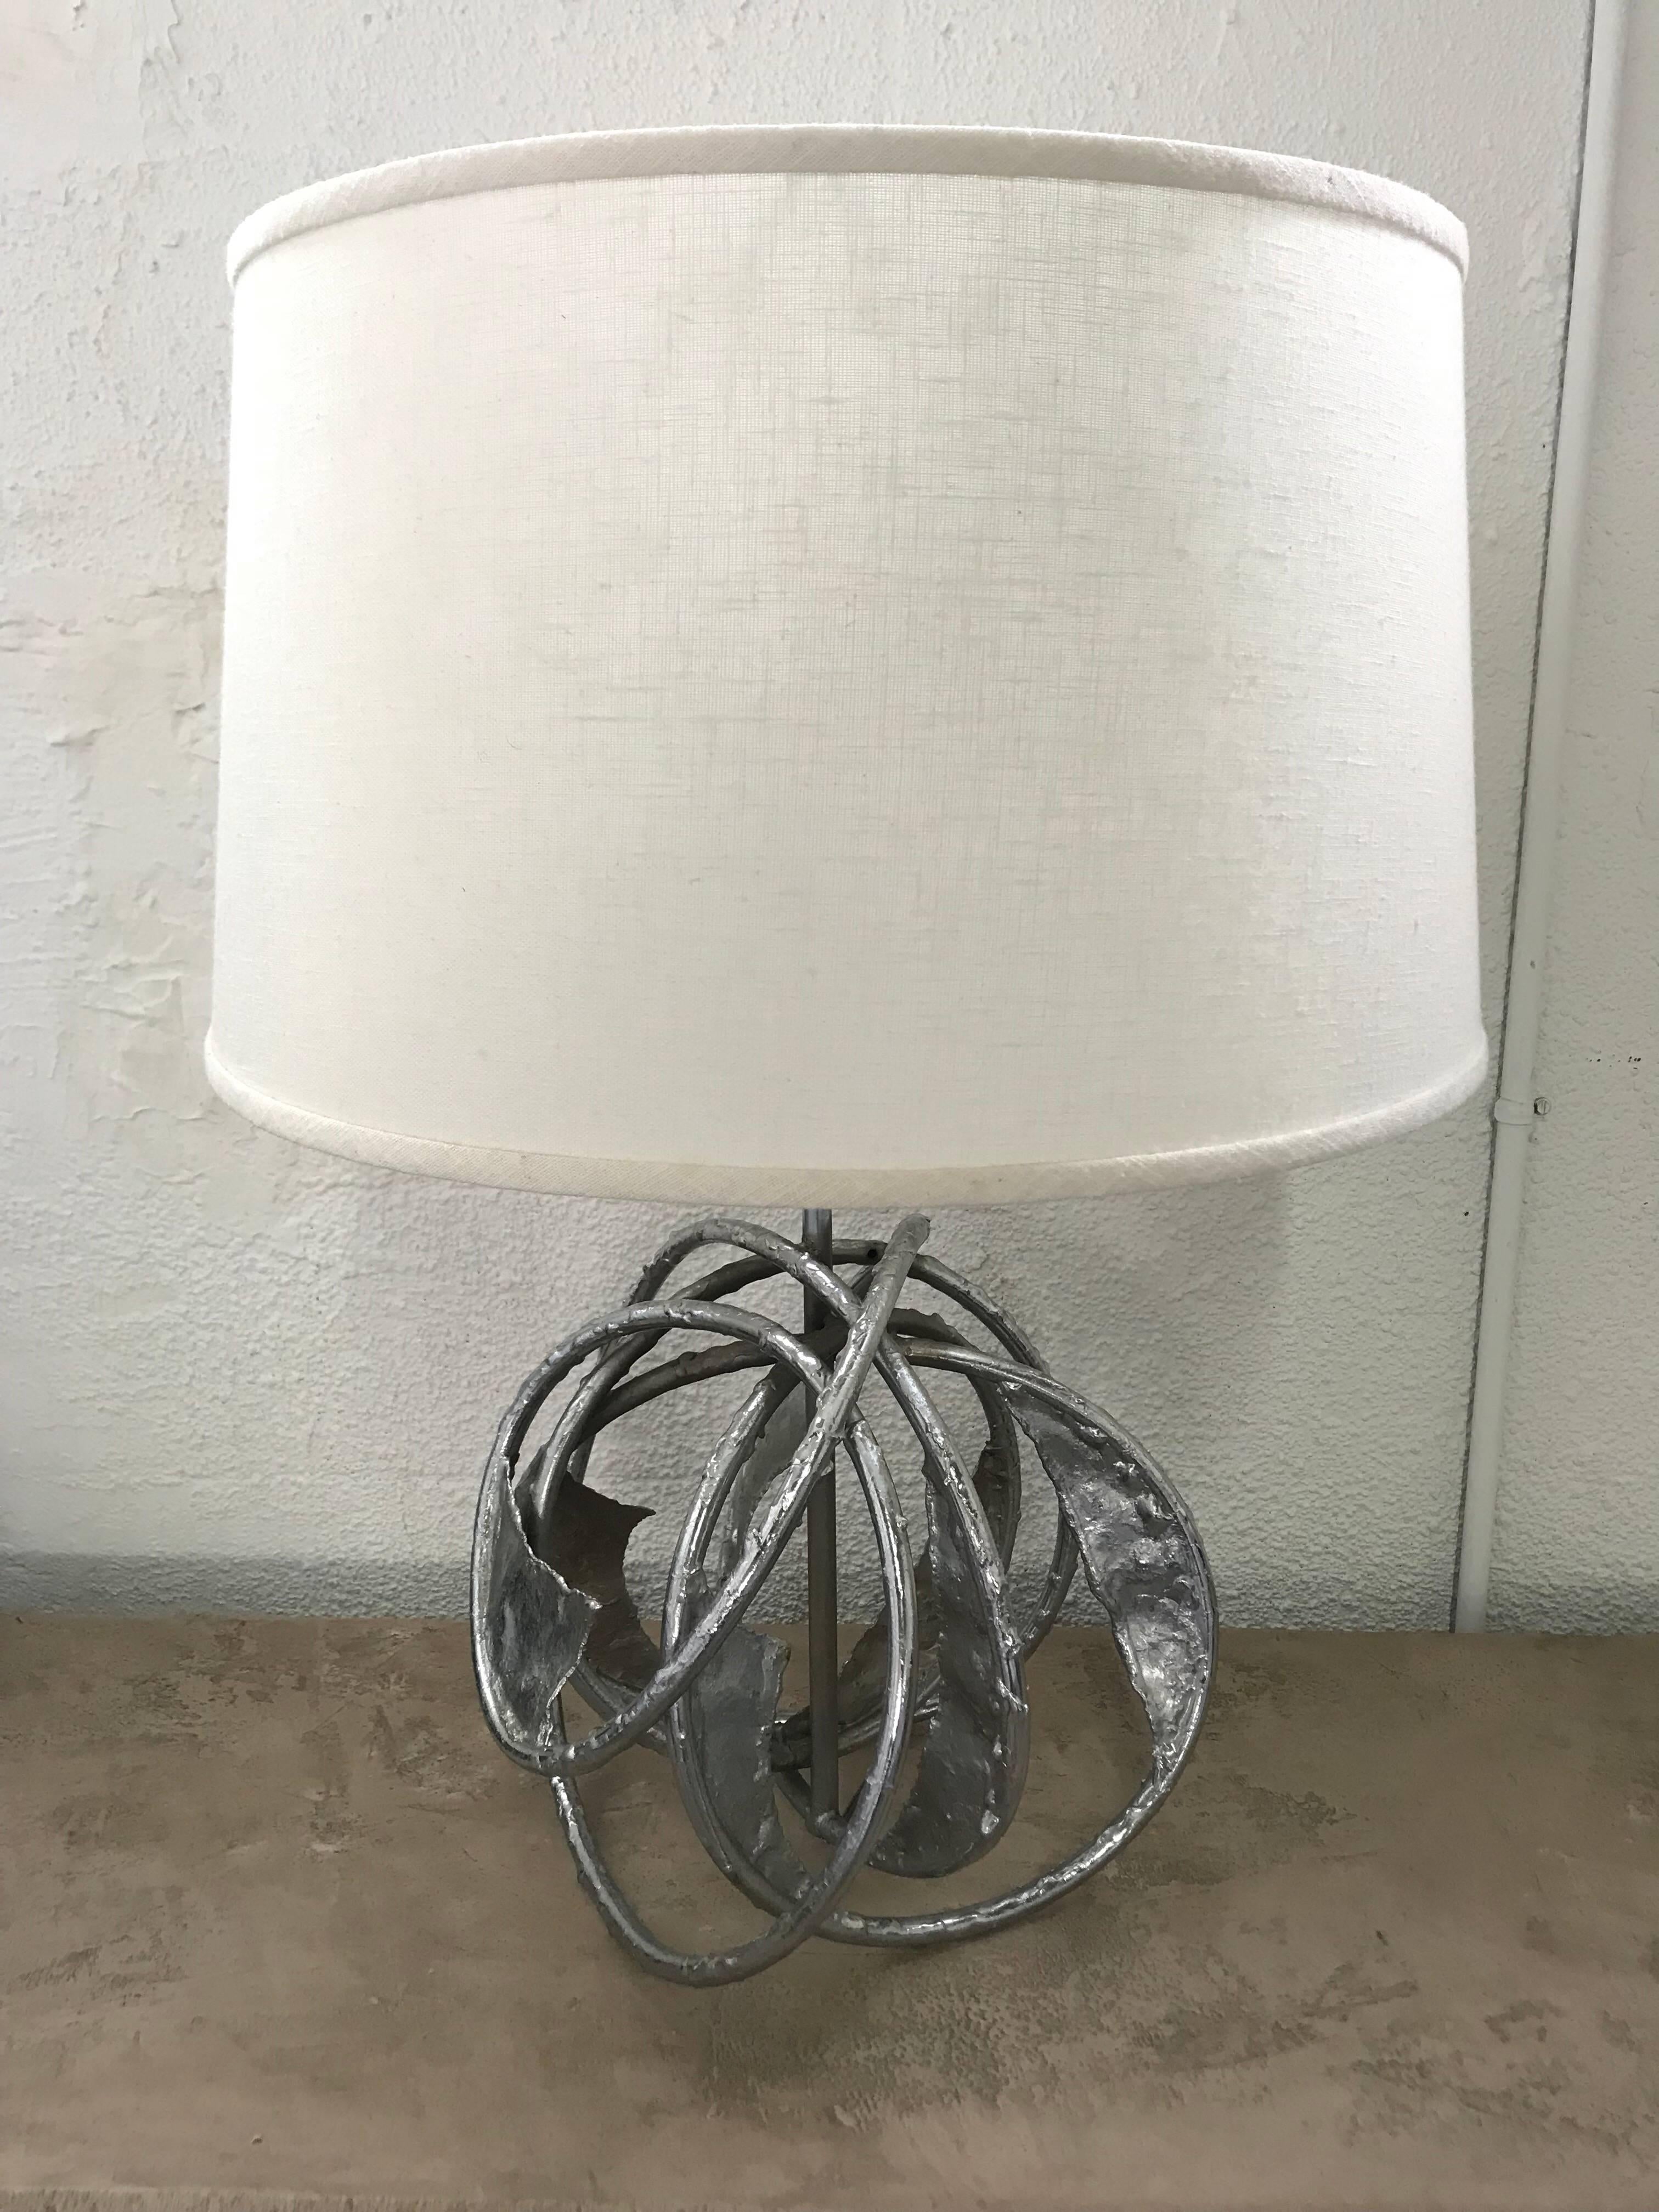 Midcentury unique welded brutalist sculpture lamp rendered in chrome plated steel, different from all angles, Italy, circa 1970s.

shade for display purposes only.